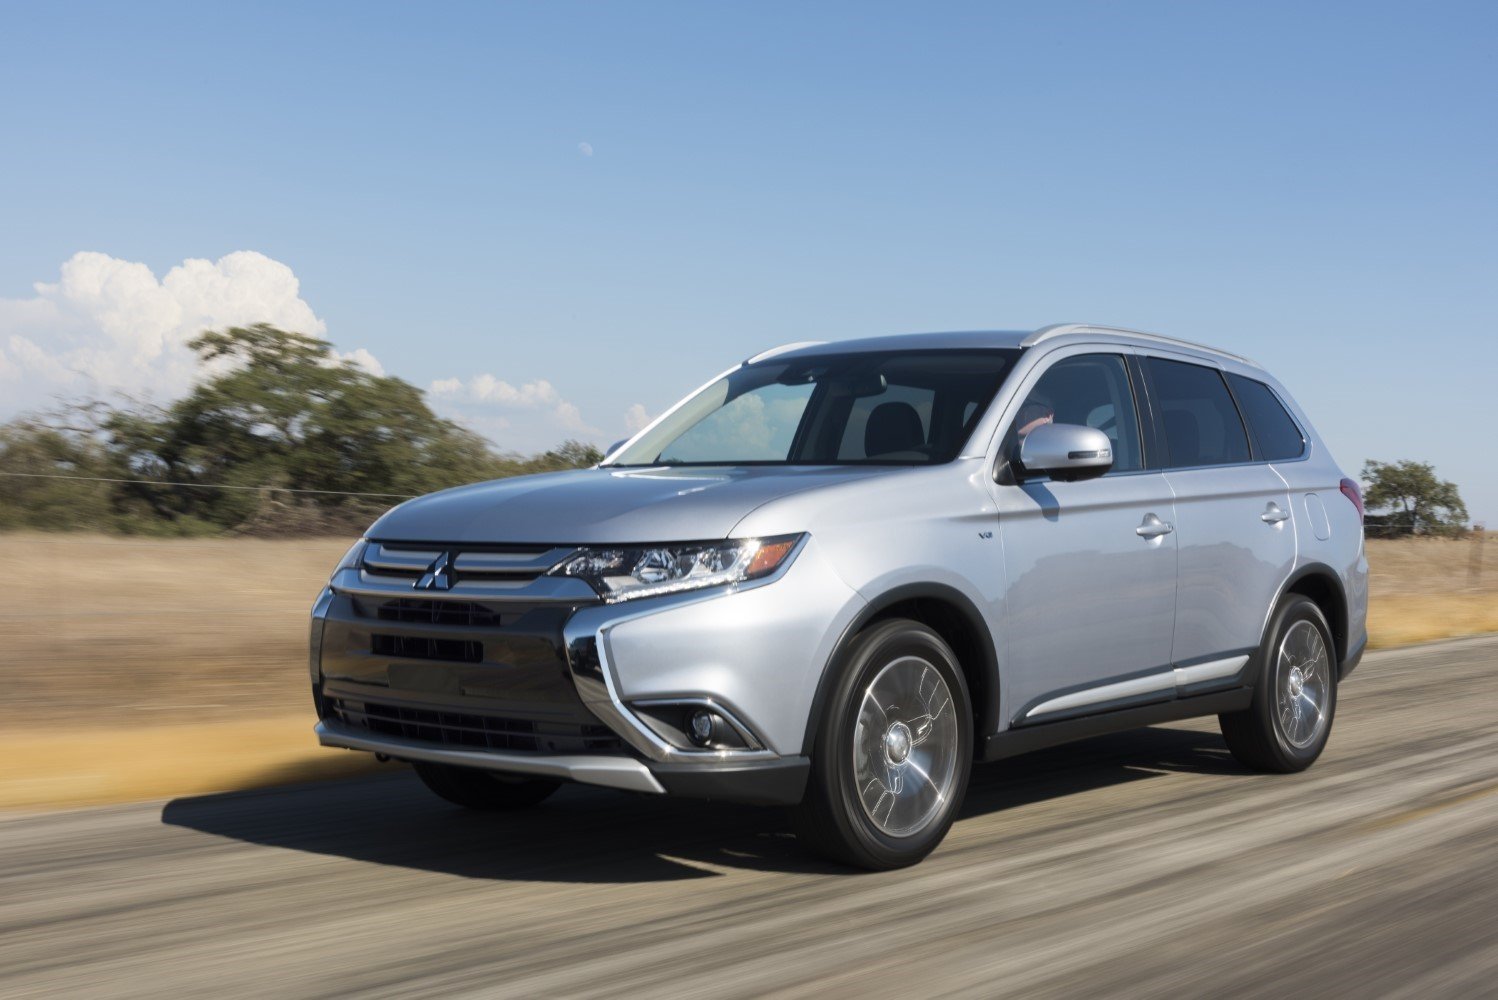 2017 Mitsubishi Outlander SUV Specs, Review, and Pricing | CarSession